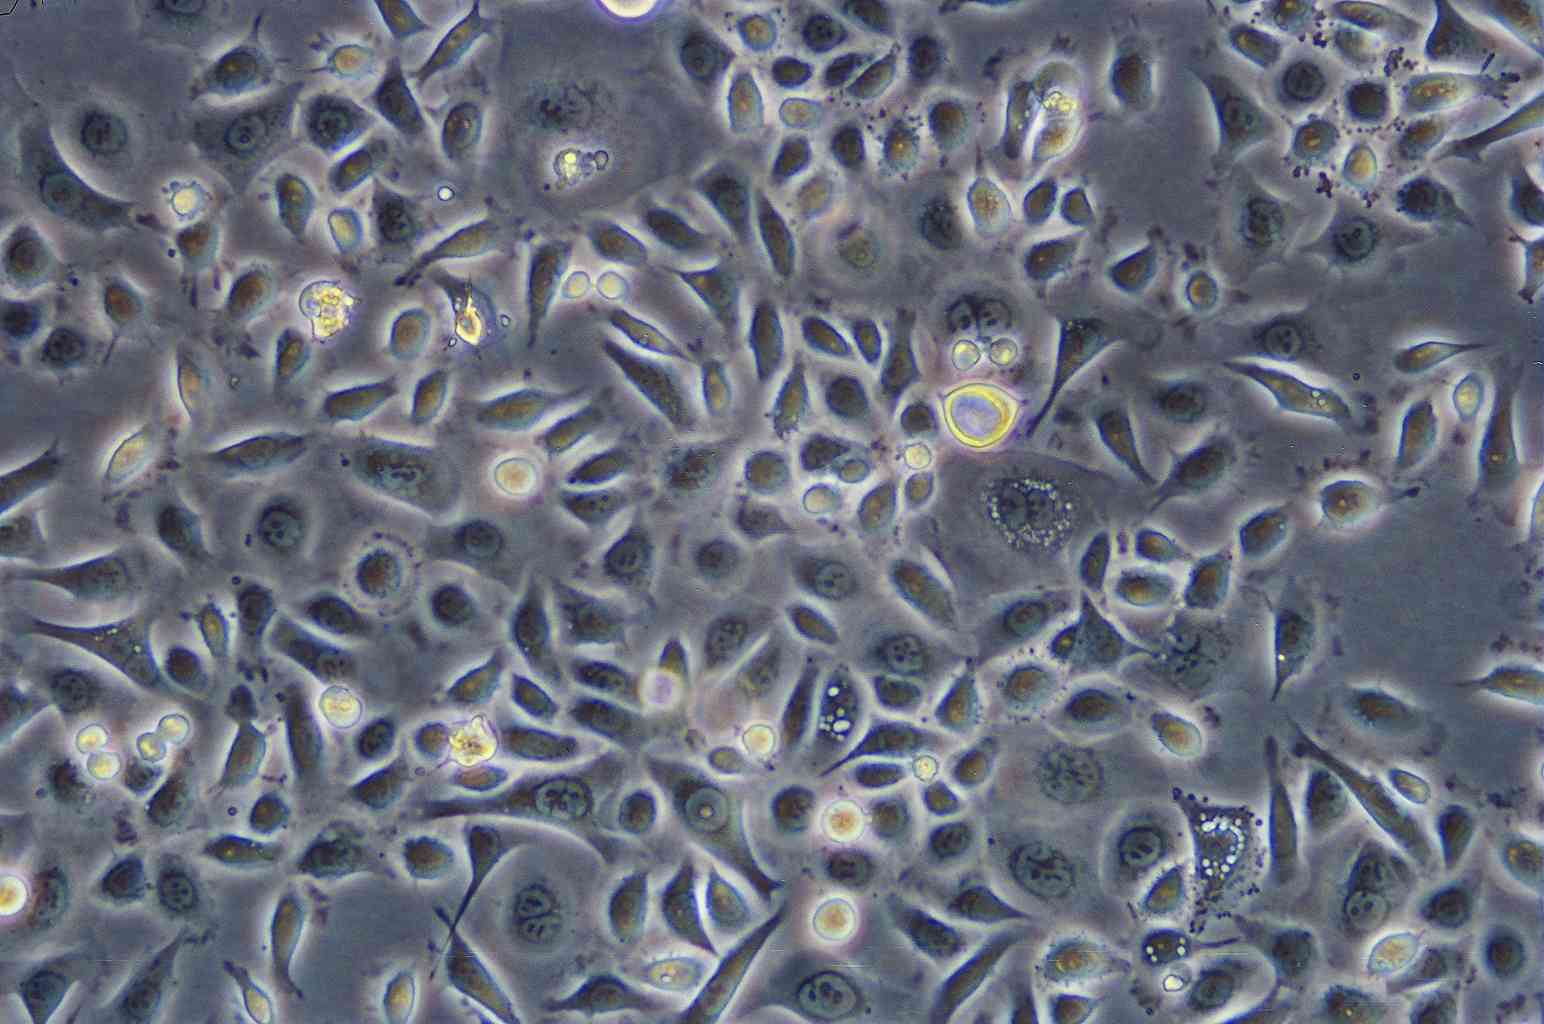 NIH 3T3 Cell|小鼠胚胎细胞,NIH 3T3 Cell